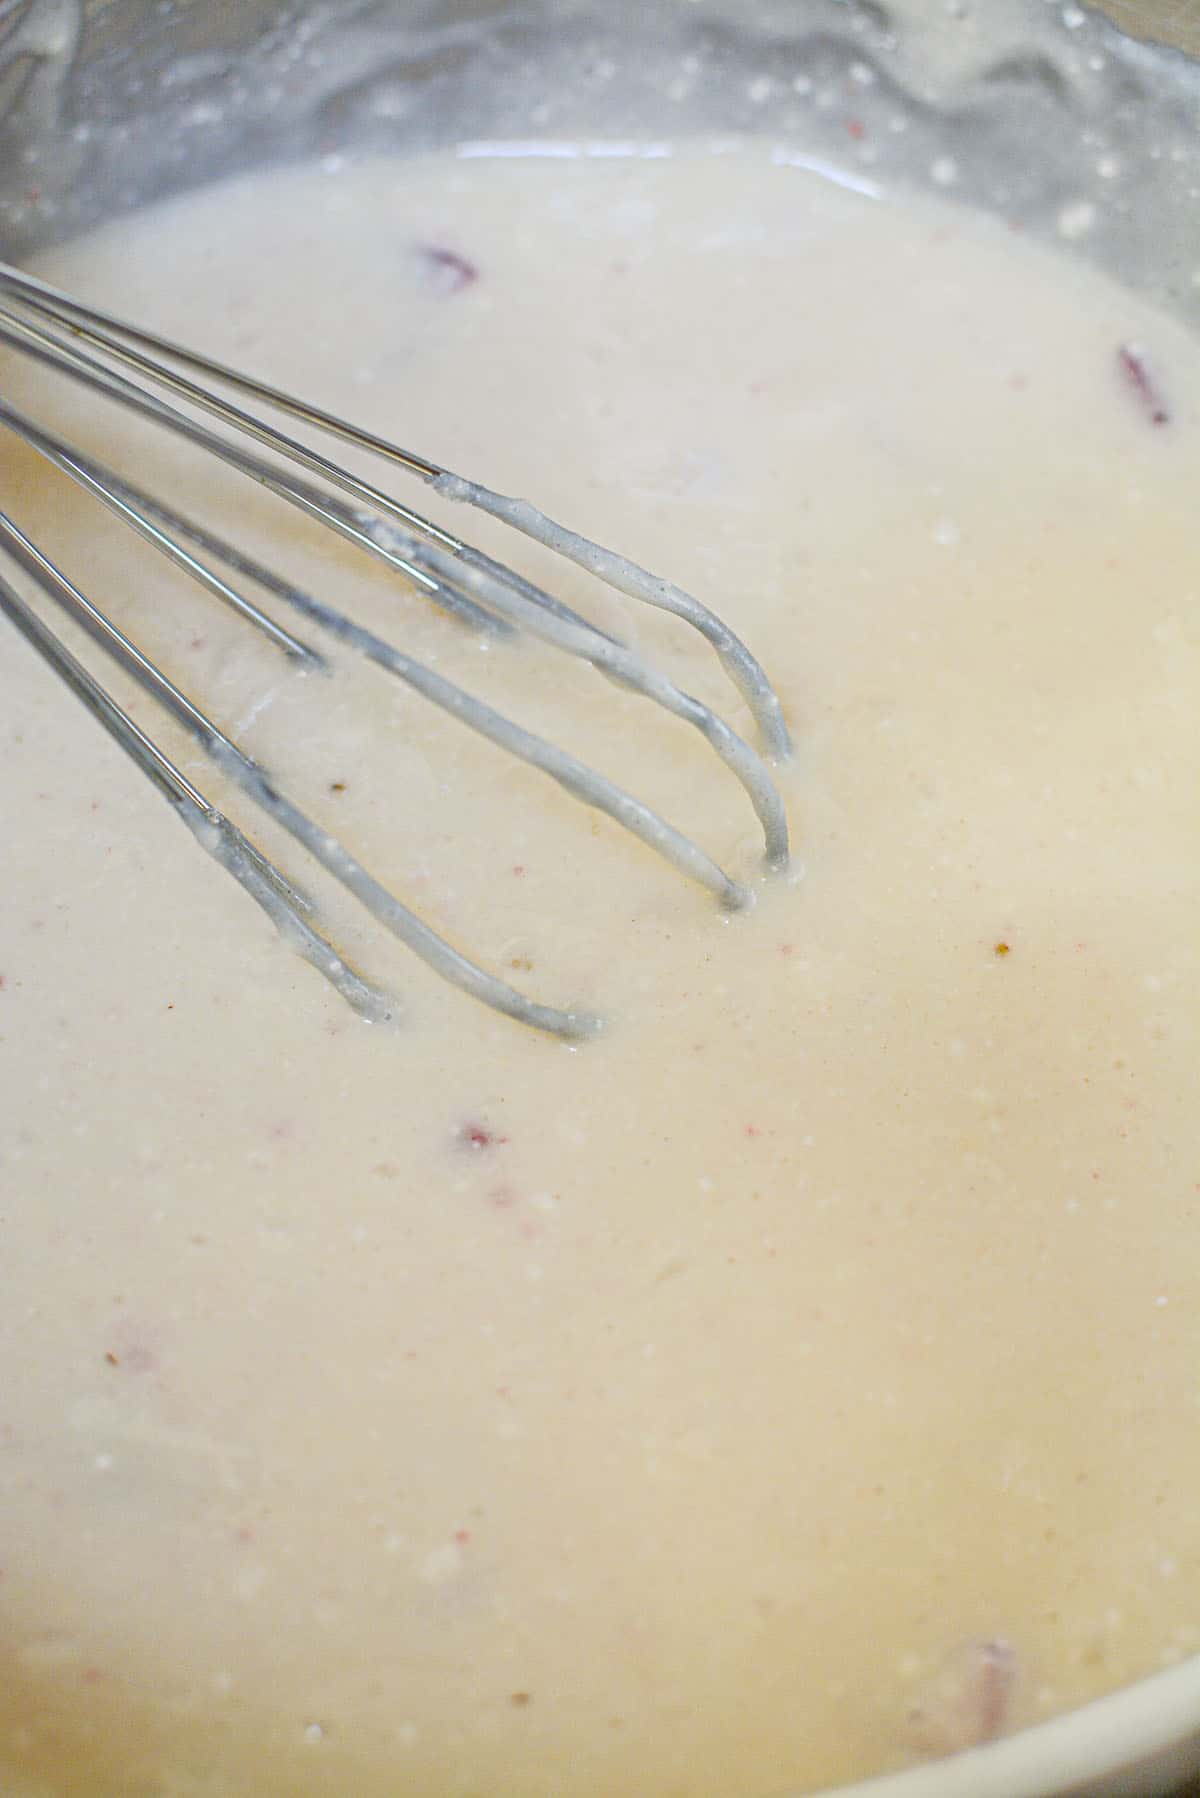 The strawberry pancake batter in a silver bowl, mixed, with a silver whisk sitting in the batter.